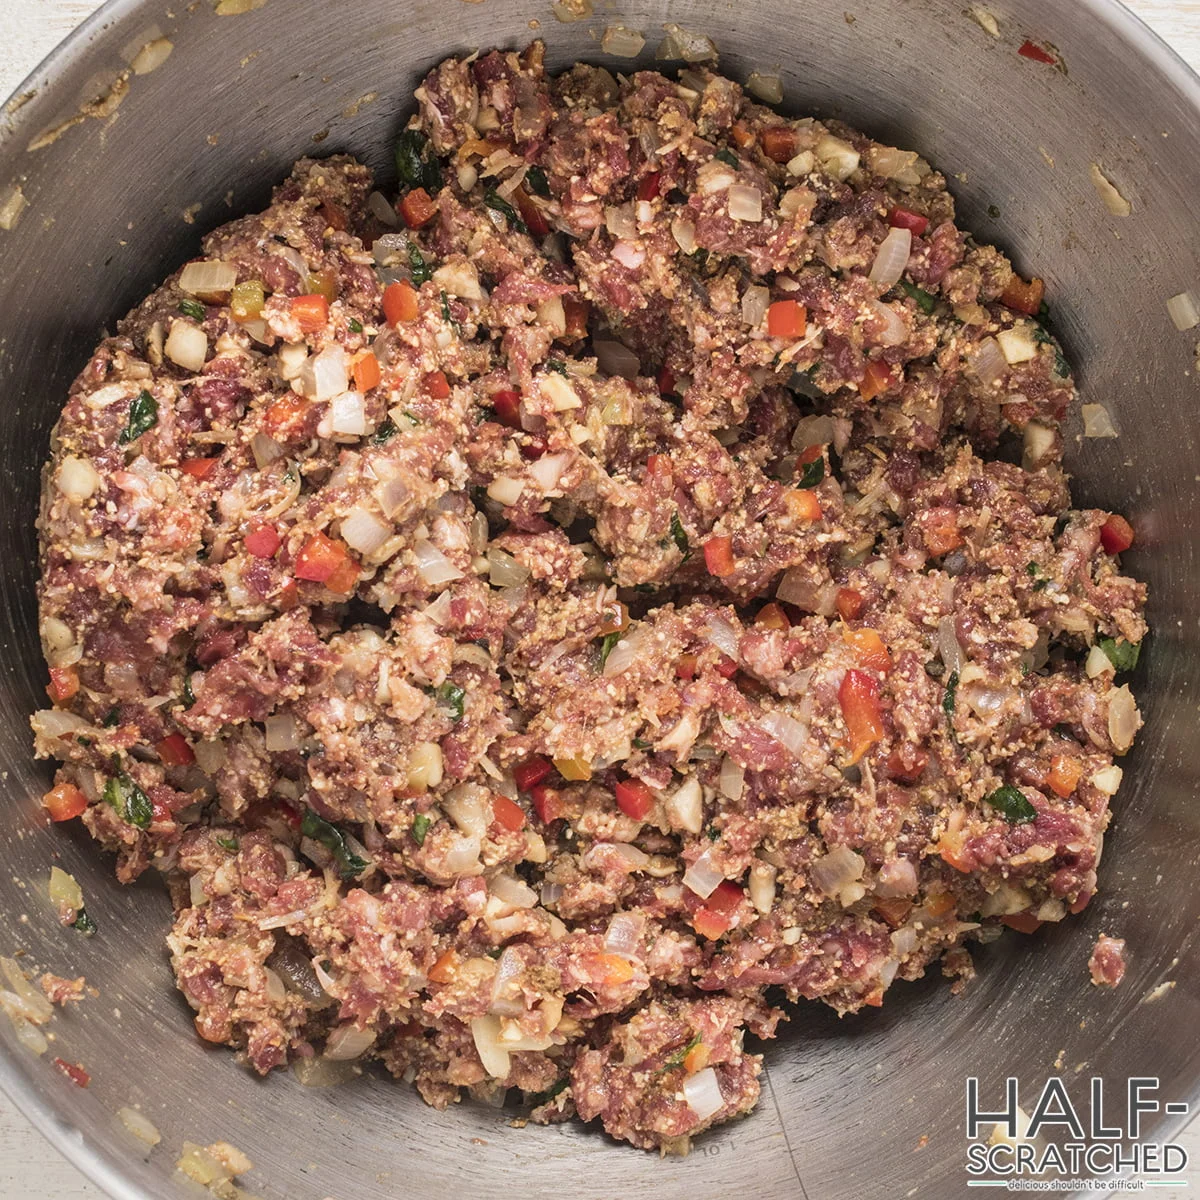 Meatloaf mixture in a bowl